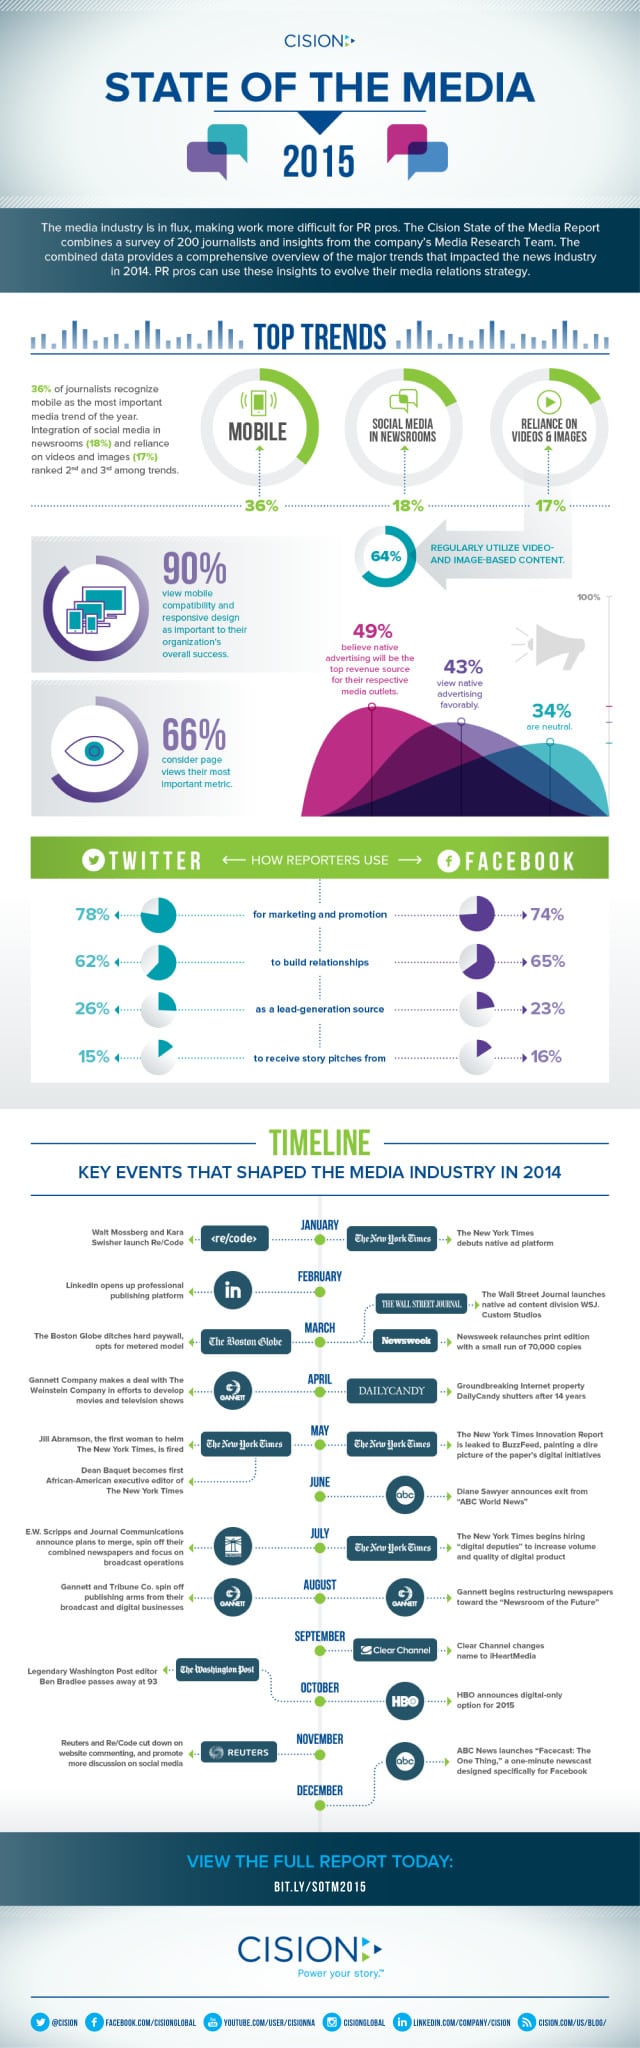 State of the Media Infographic